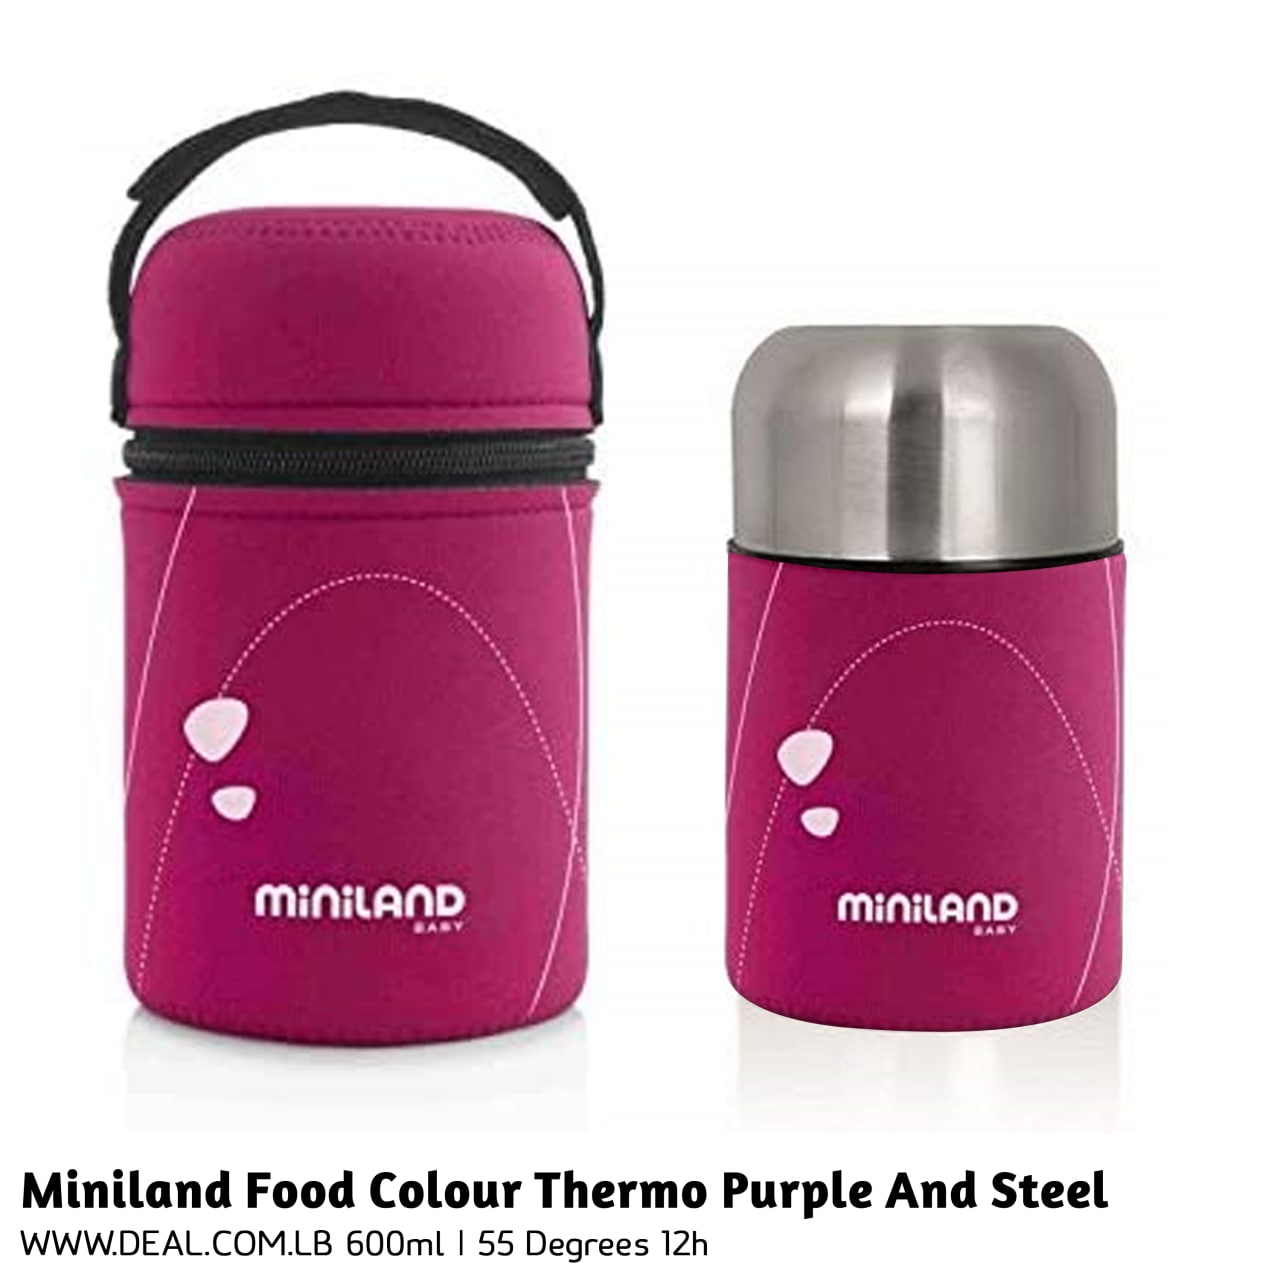 Miniland+Food+Color+Thermo+Purple+And+Steel